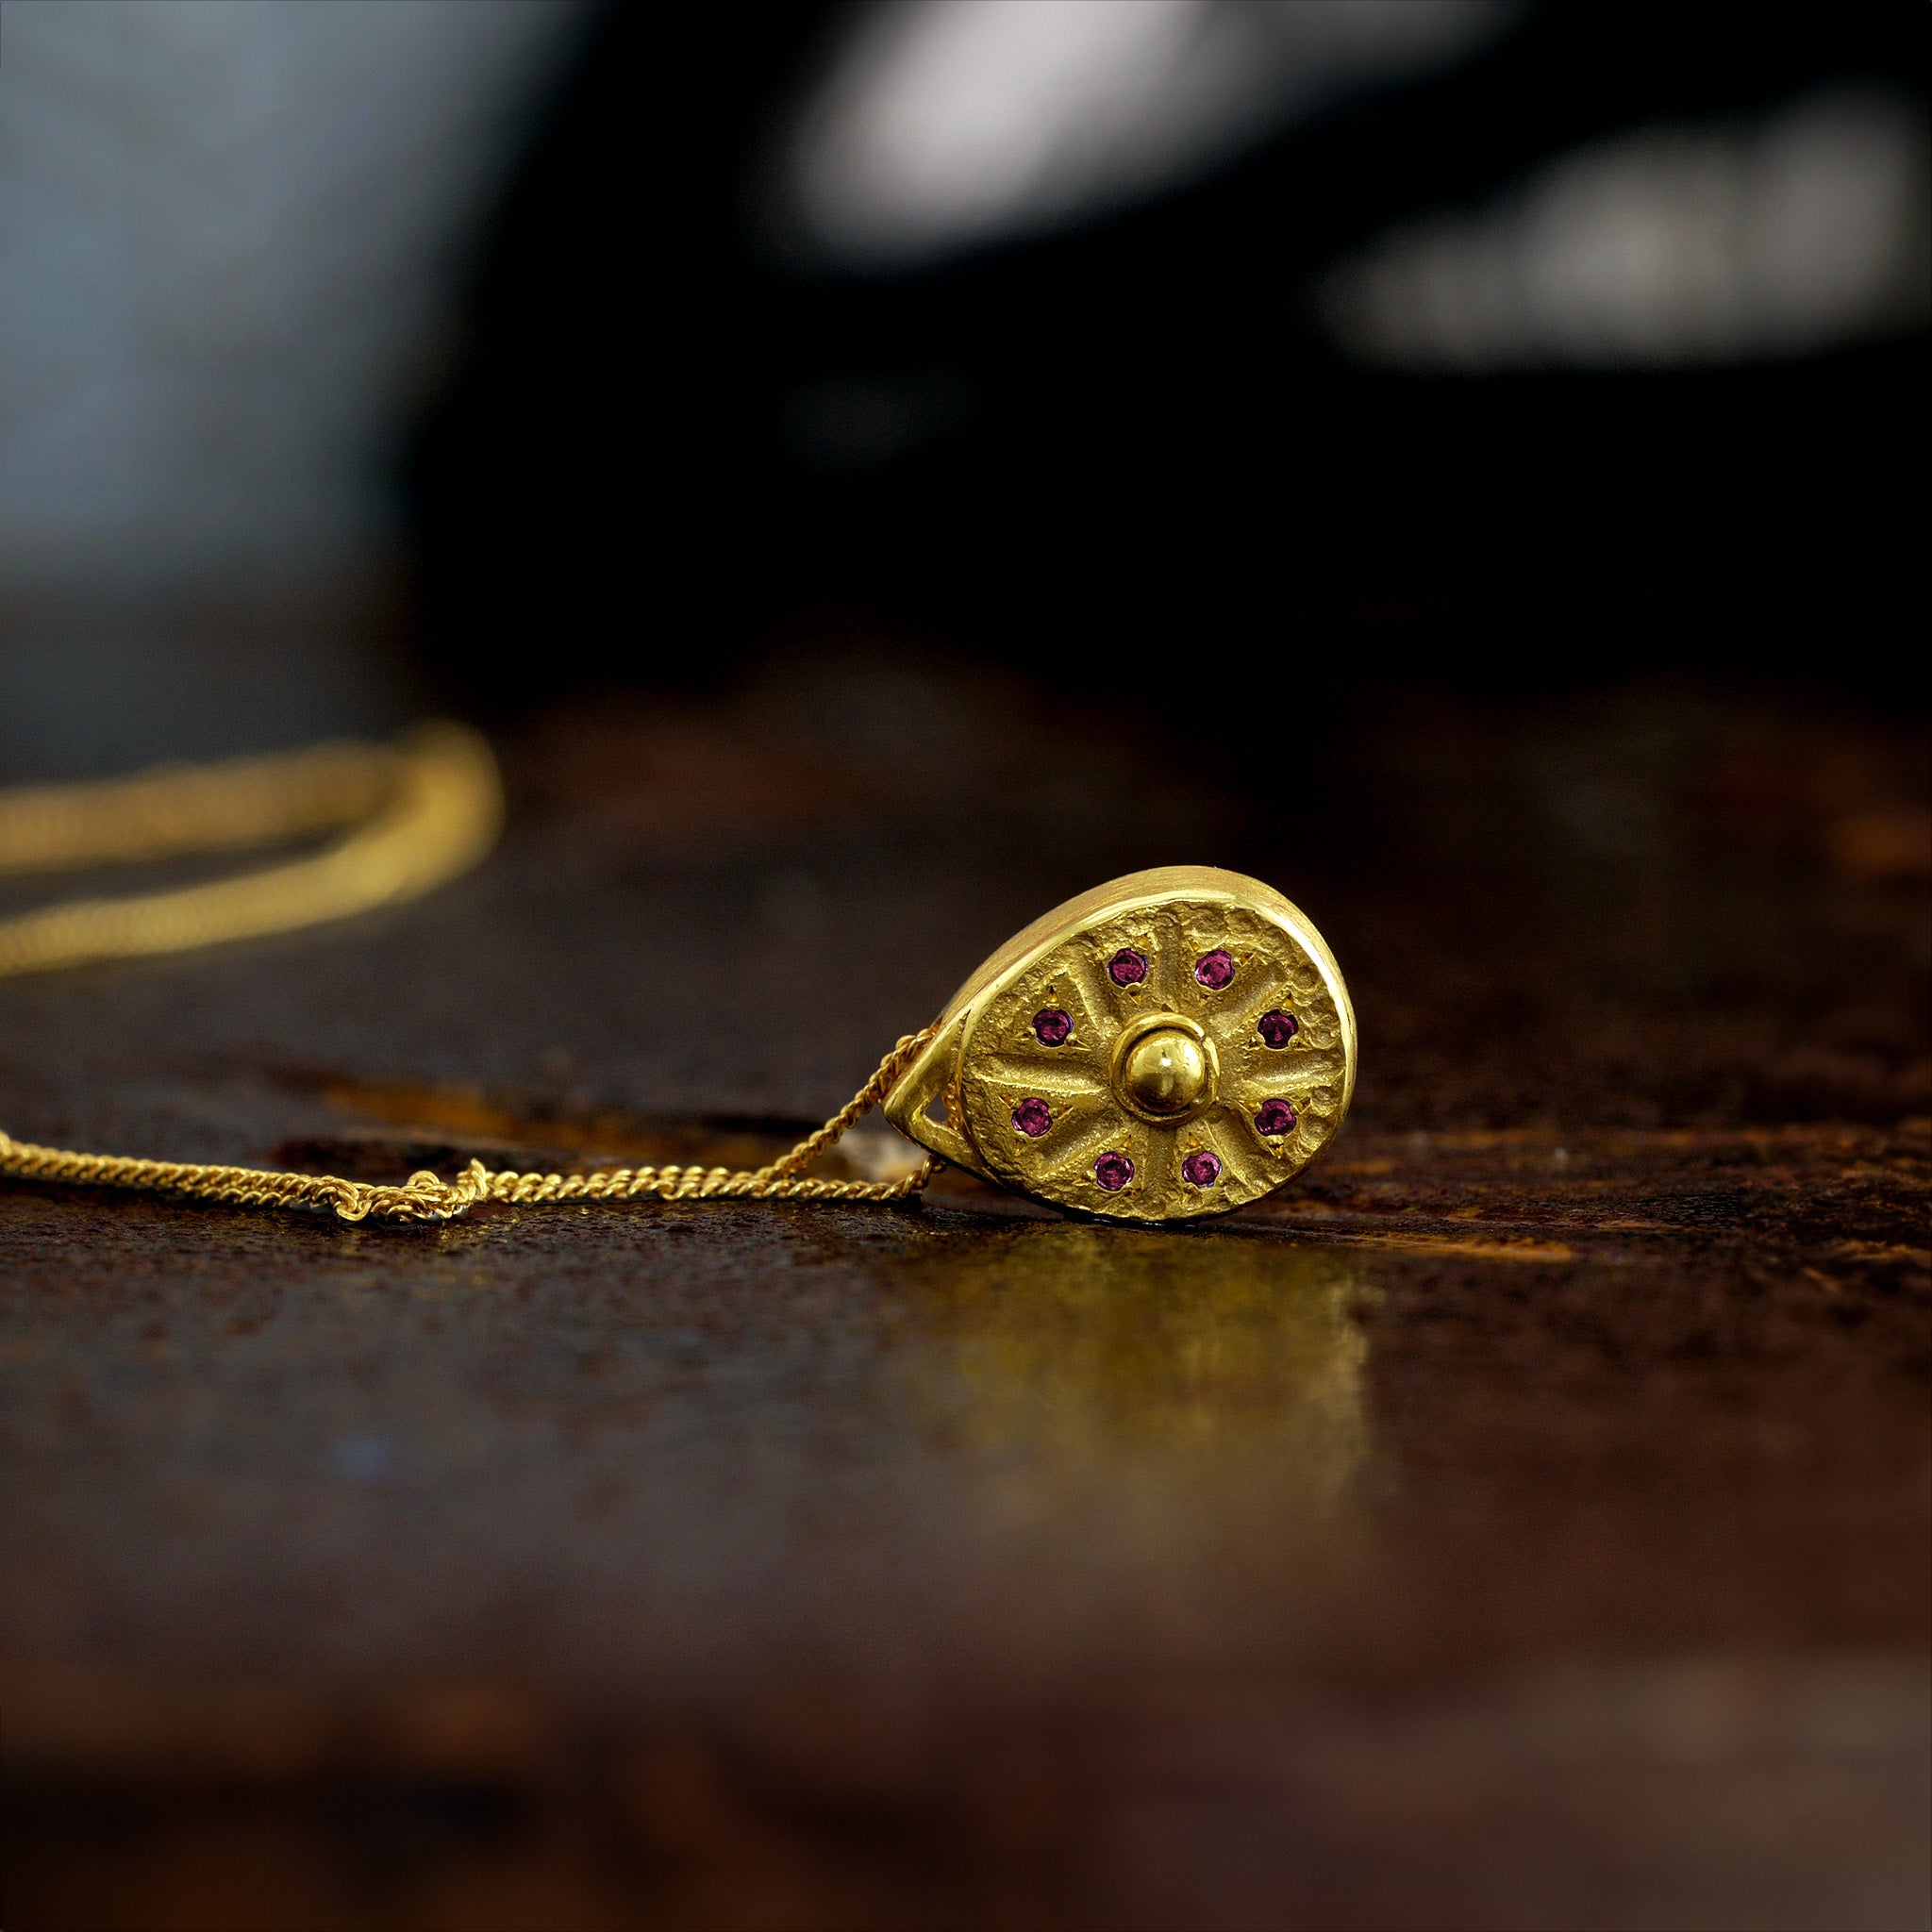 Close up of 18k Gold pendant resembling a Sundial clock, accented with small Rubies between the edges of each clock hand on a dark rusty background. A luxurious and timeless addition to any collection.